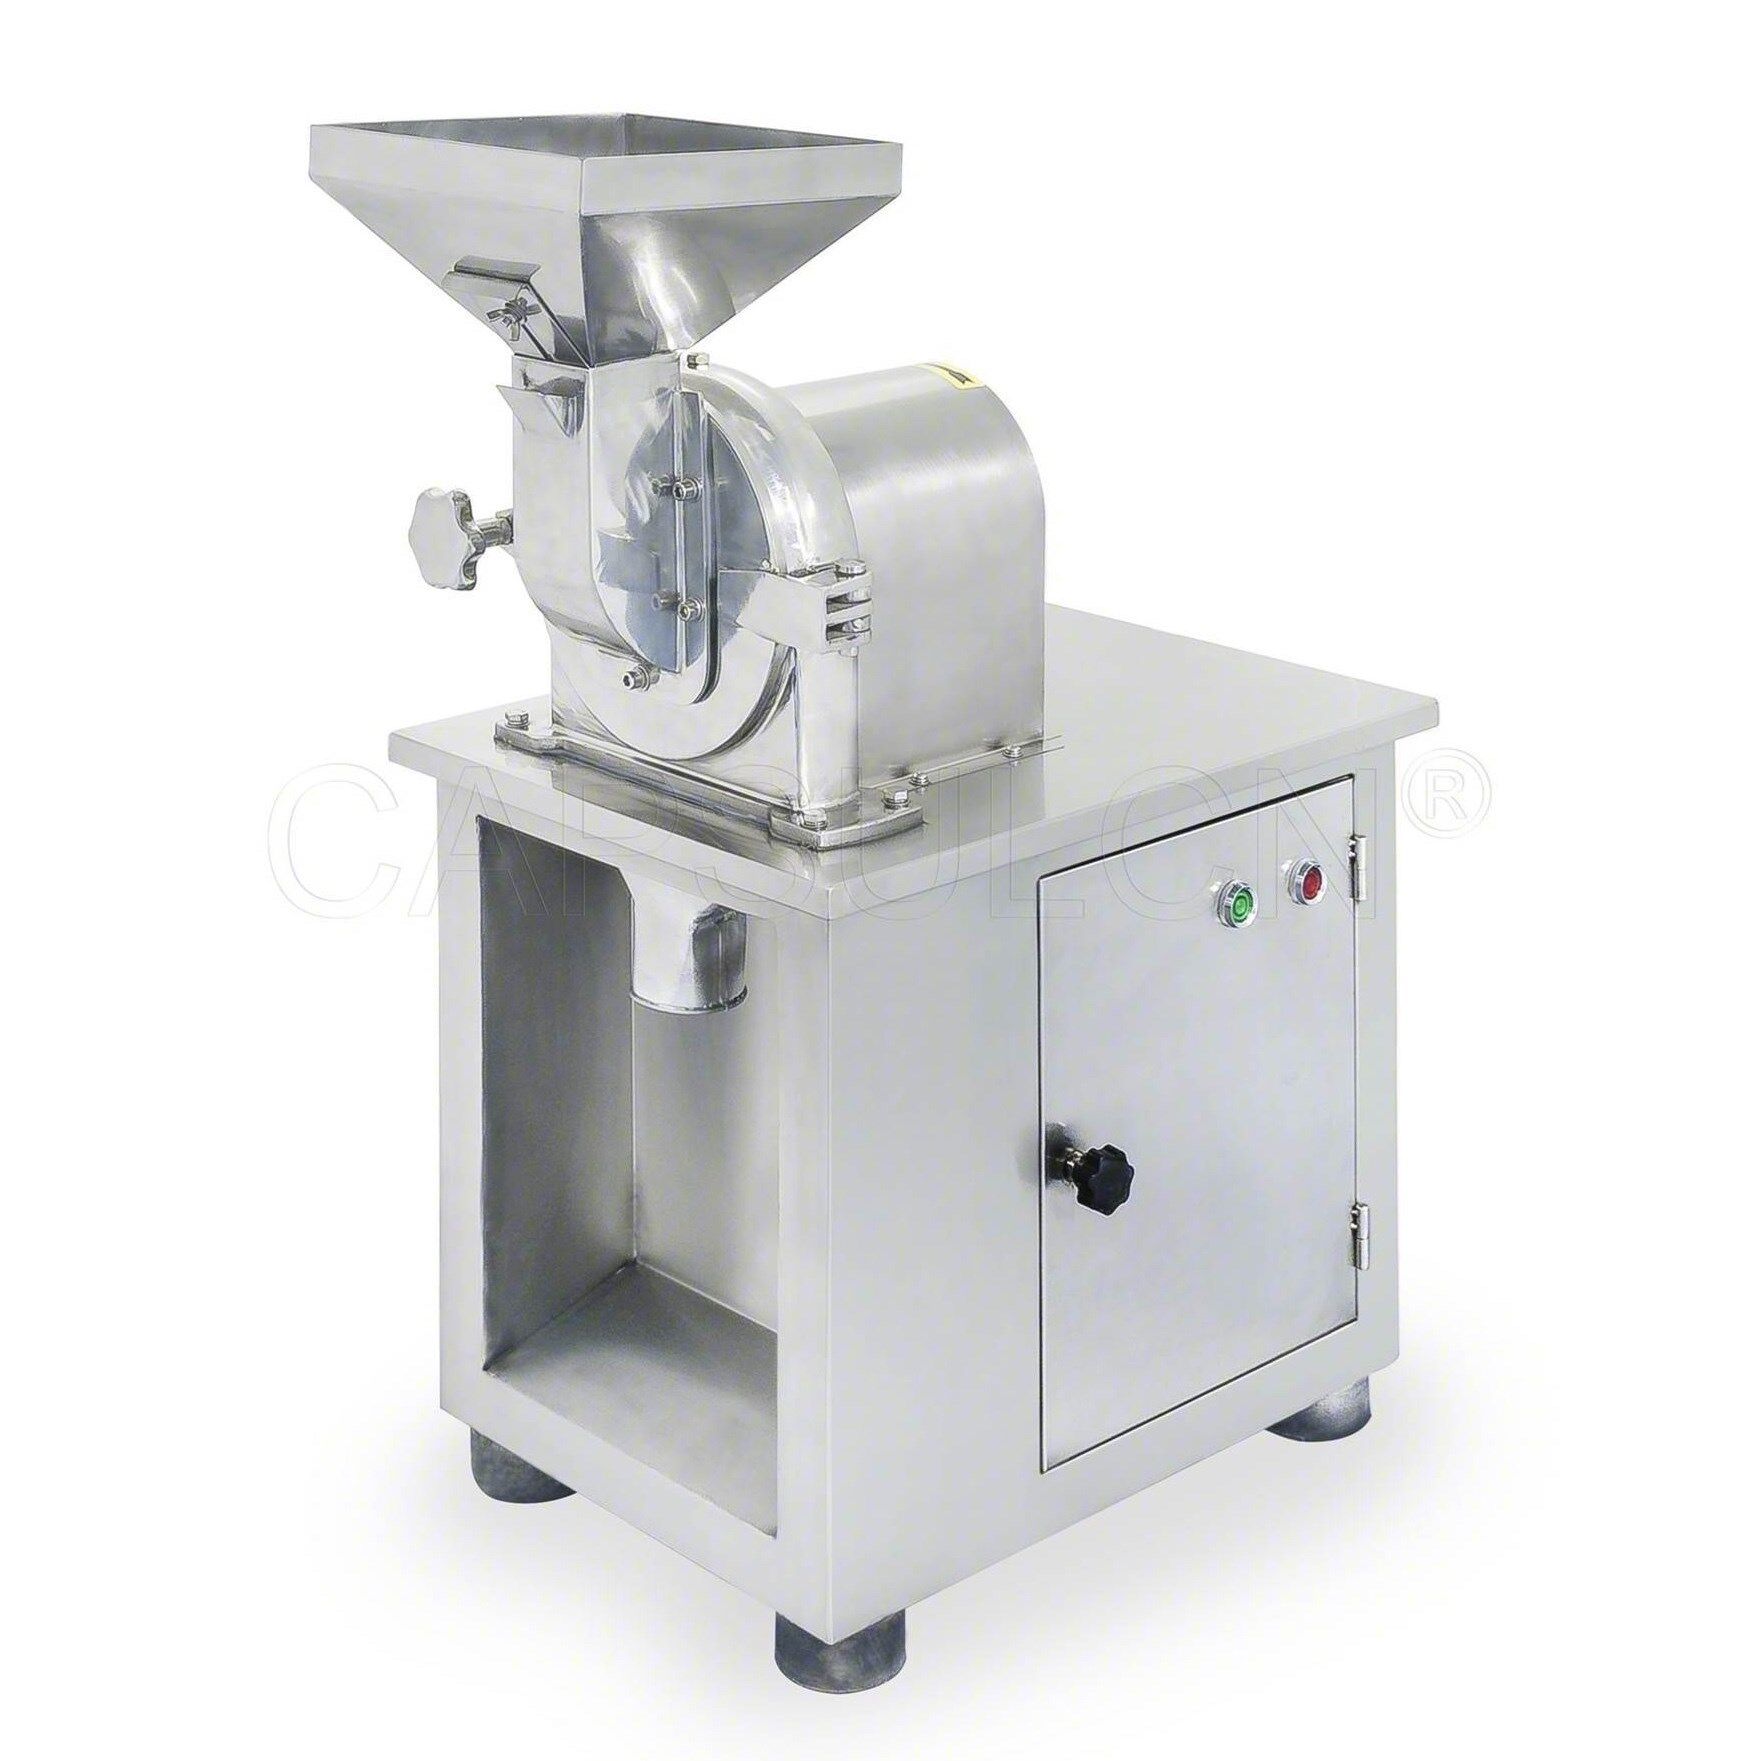 https://cdn.capsulcn.com/content/images/thumbs/0004796_wf-automatic-continuous-mill-herb-grinder.jpeg?image_process=resize,l_960